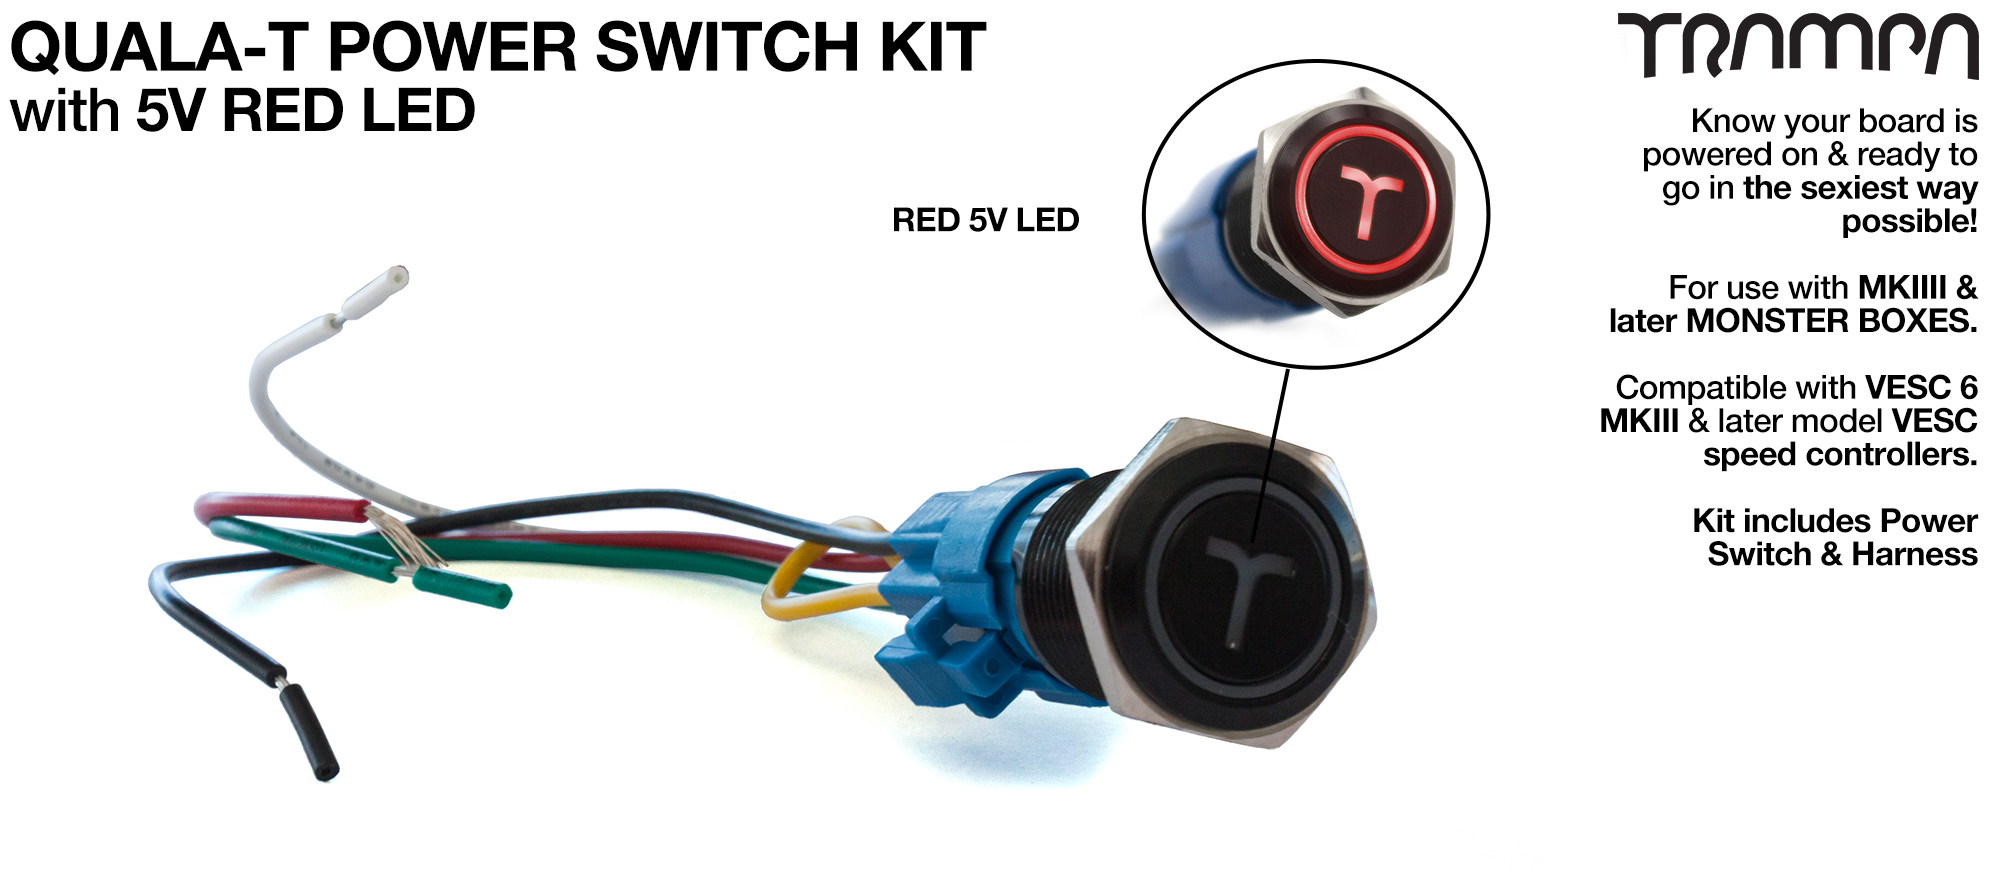 RED LED QUALA-T Power Switch Kit with 16mm Fixing Nut & Cable Harness